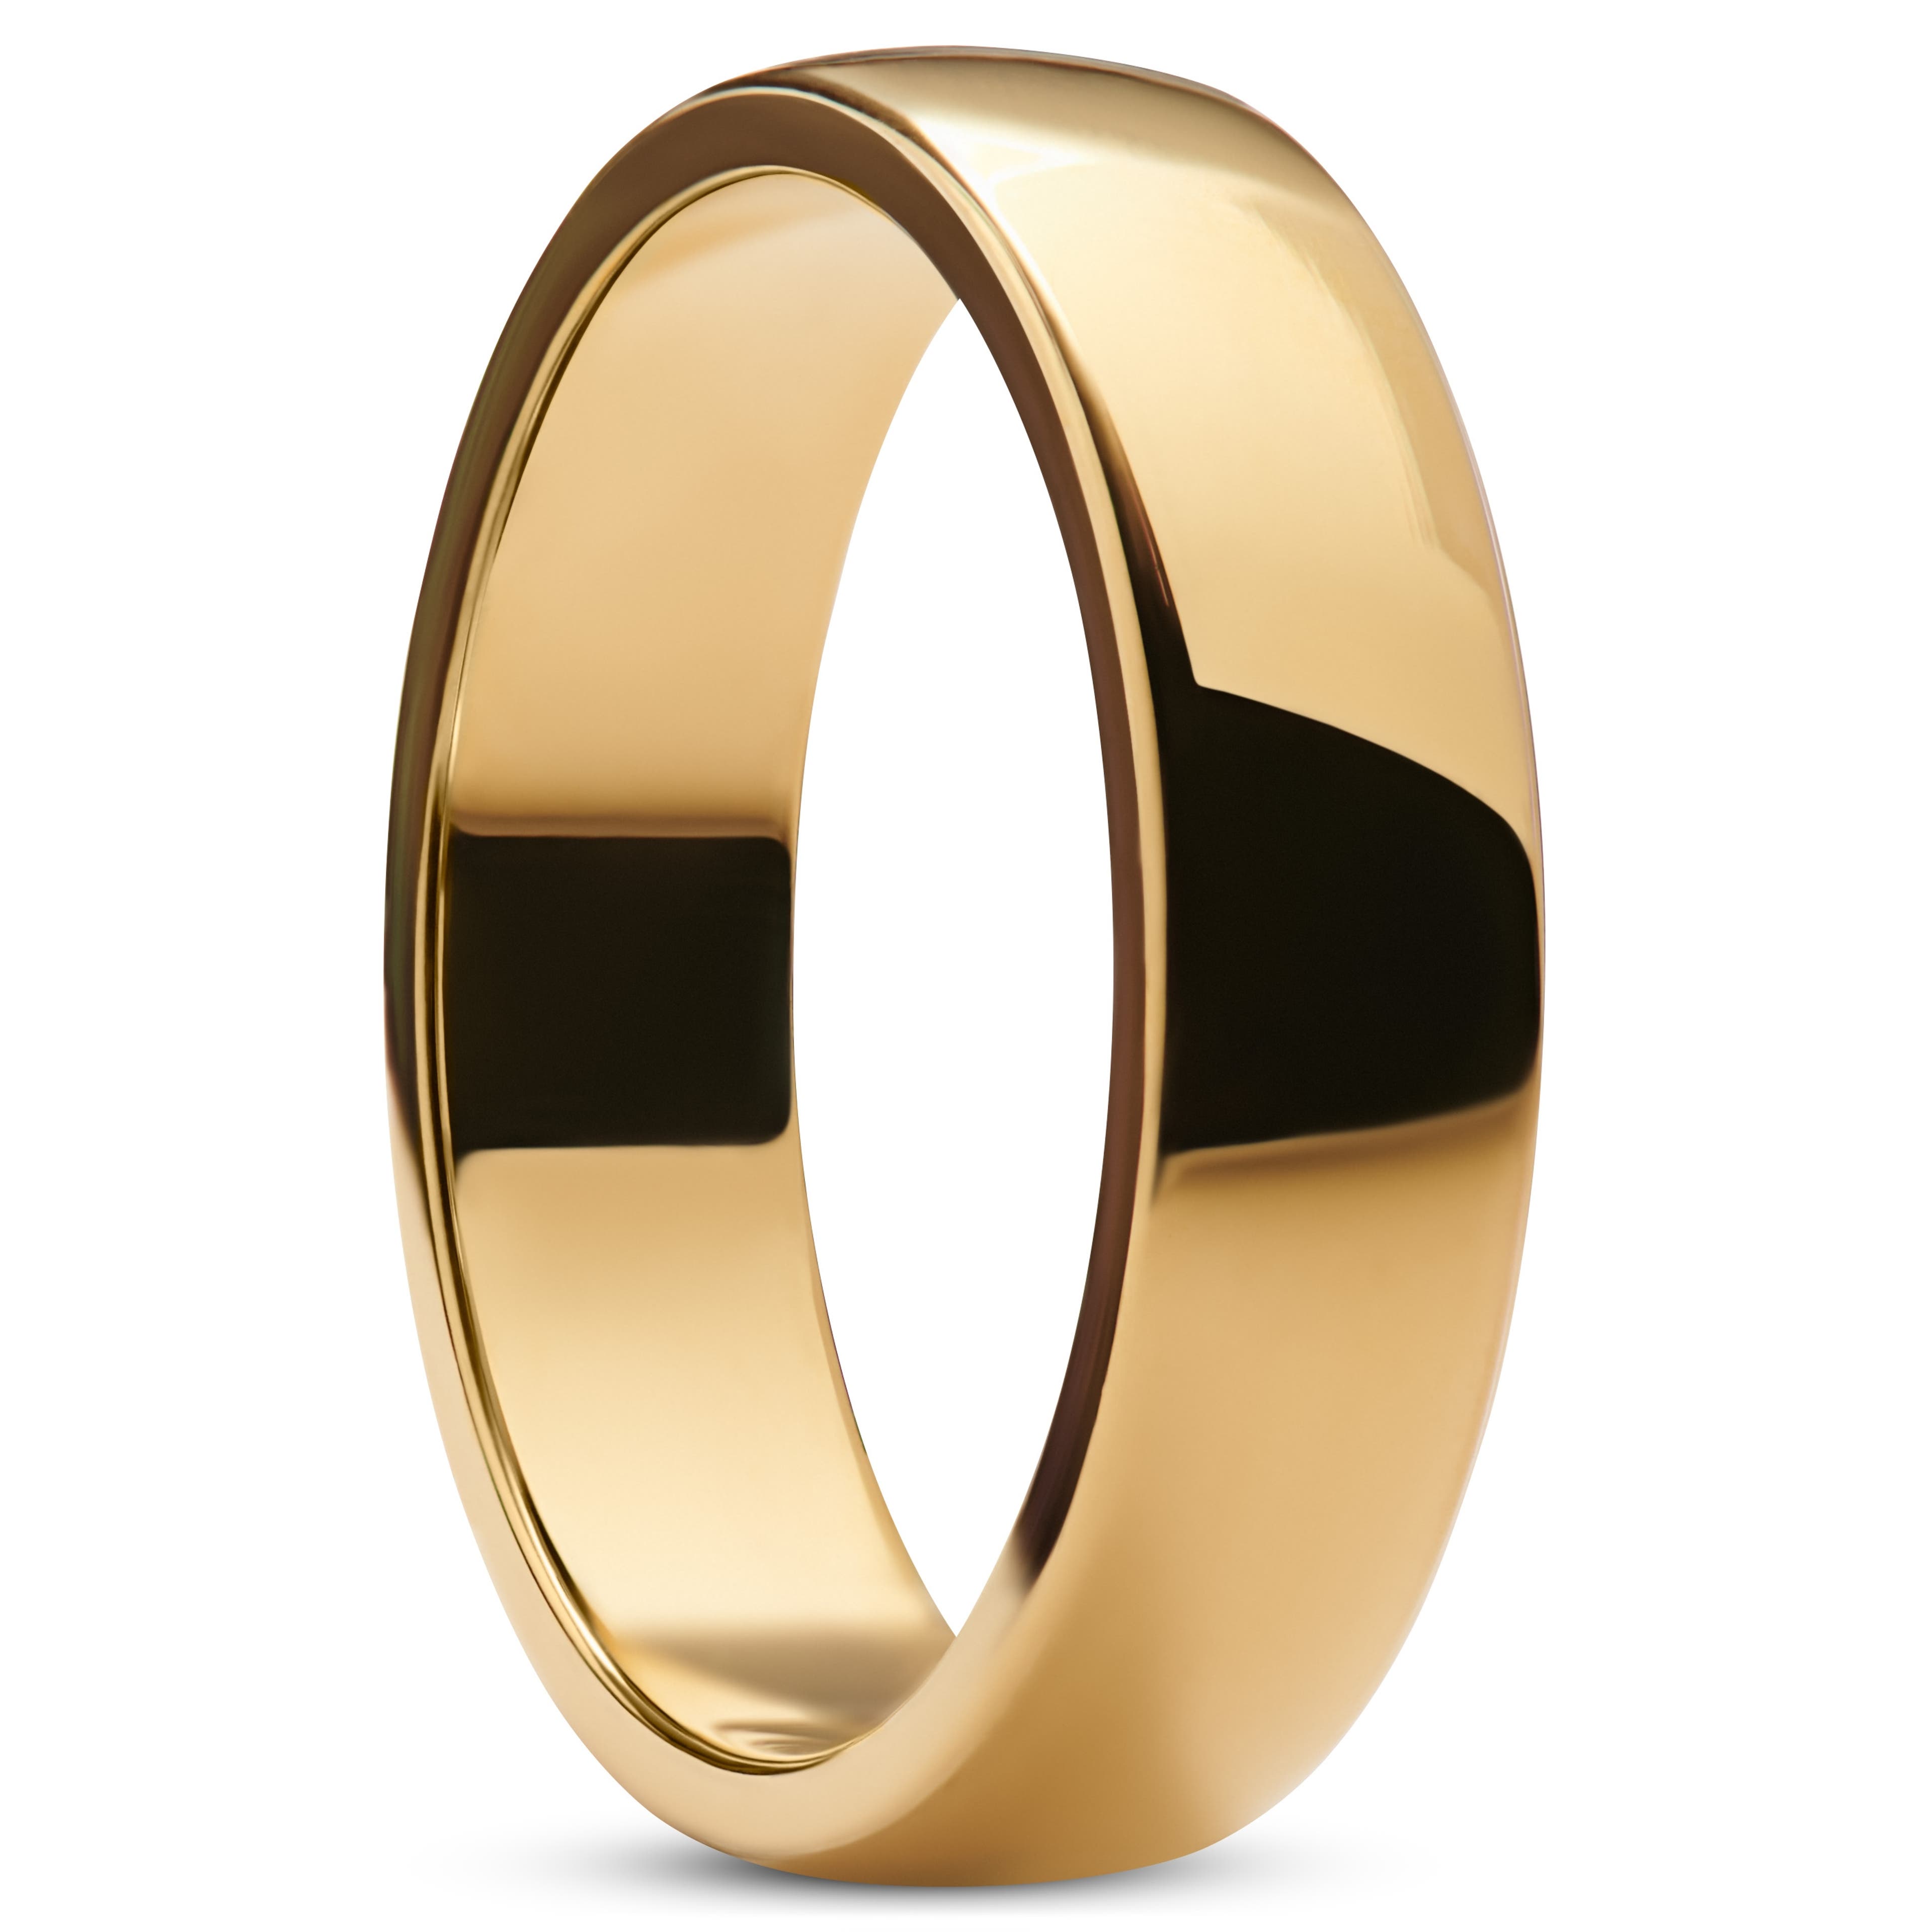 Ferrum | 6 mm Polished Gold-tone Stainless Steel D-Shape Ring